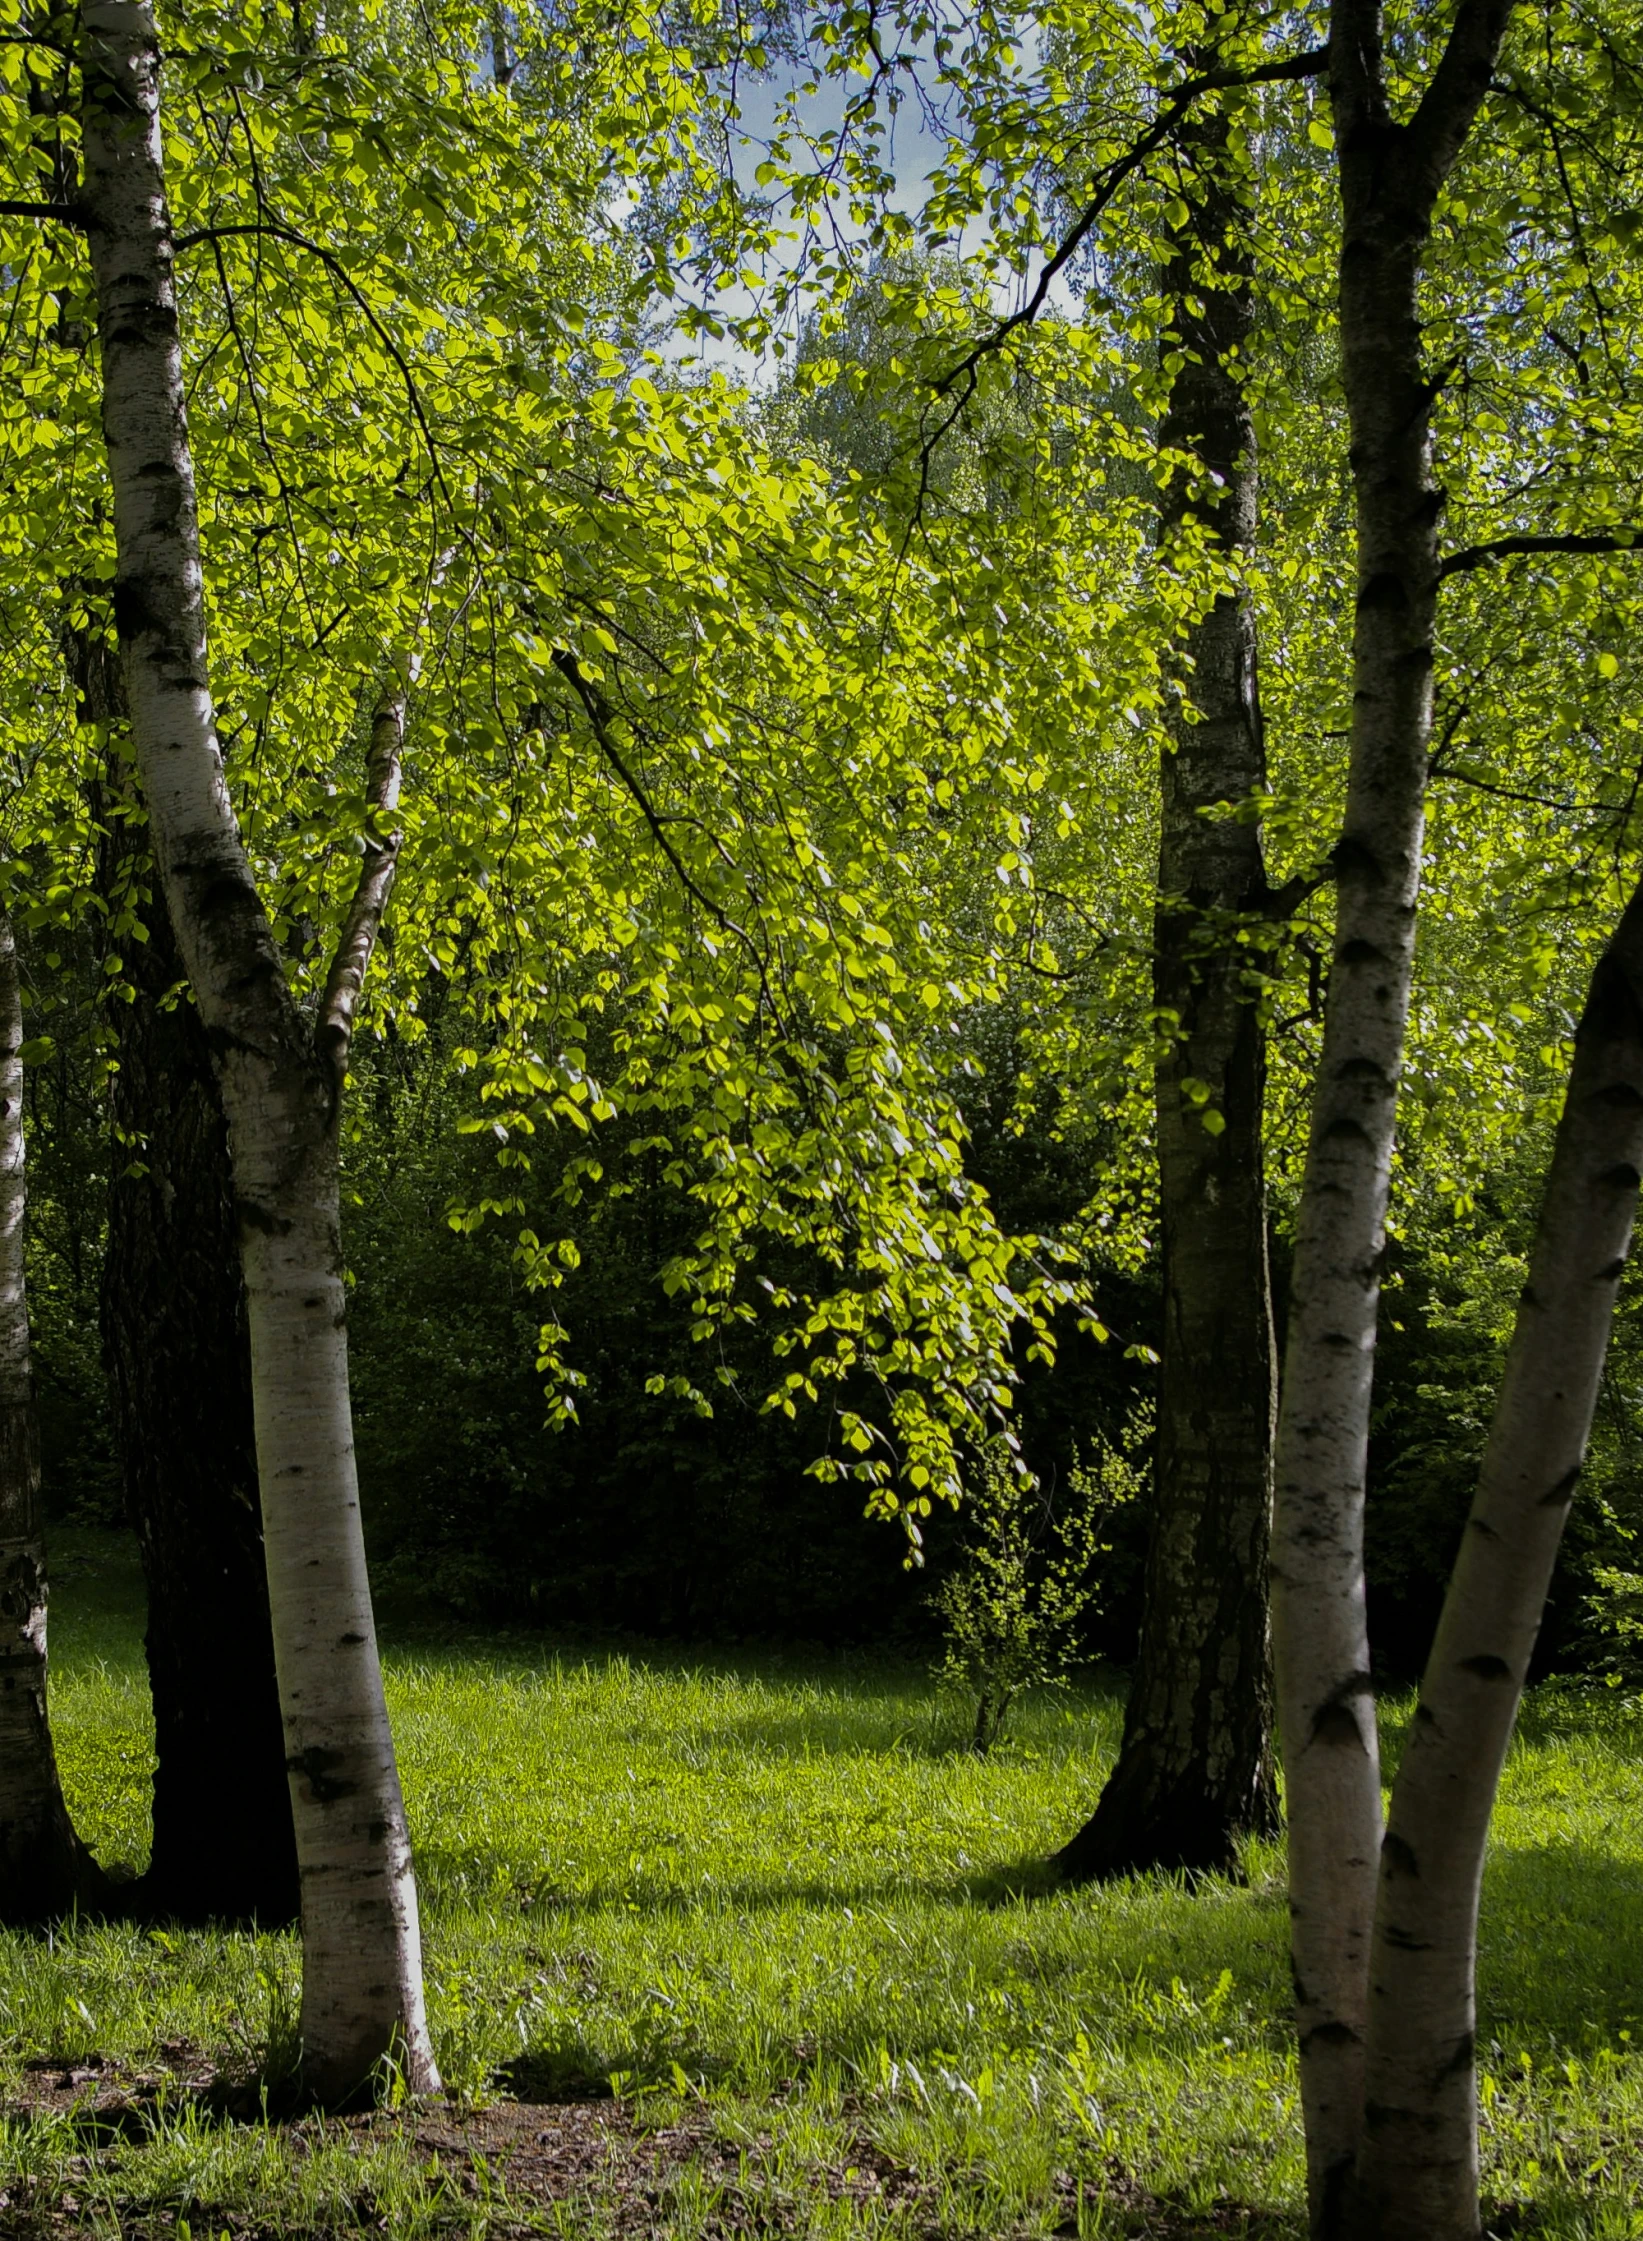 the trees are lined with green foliage in a forest